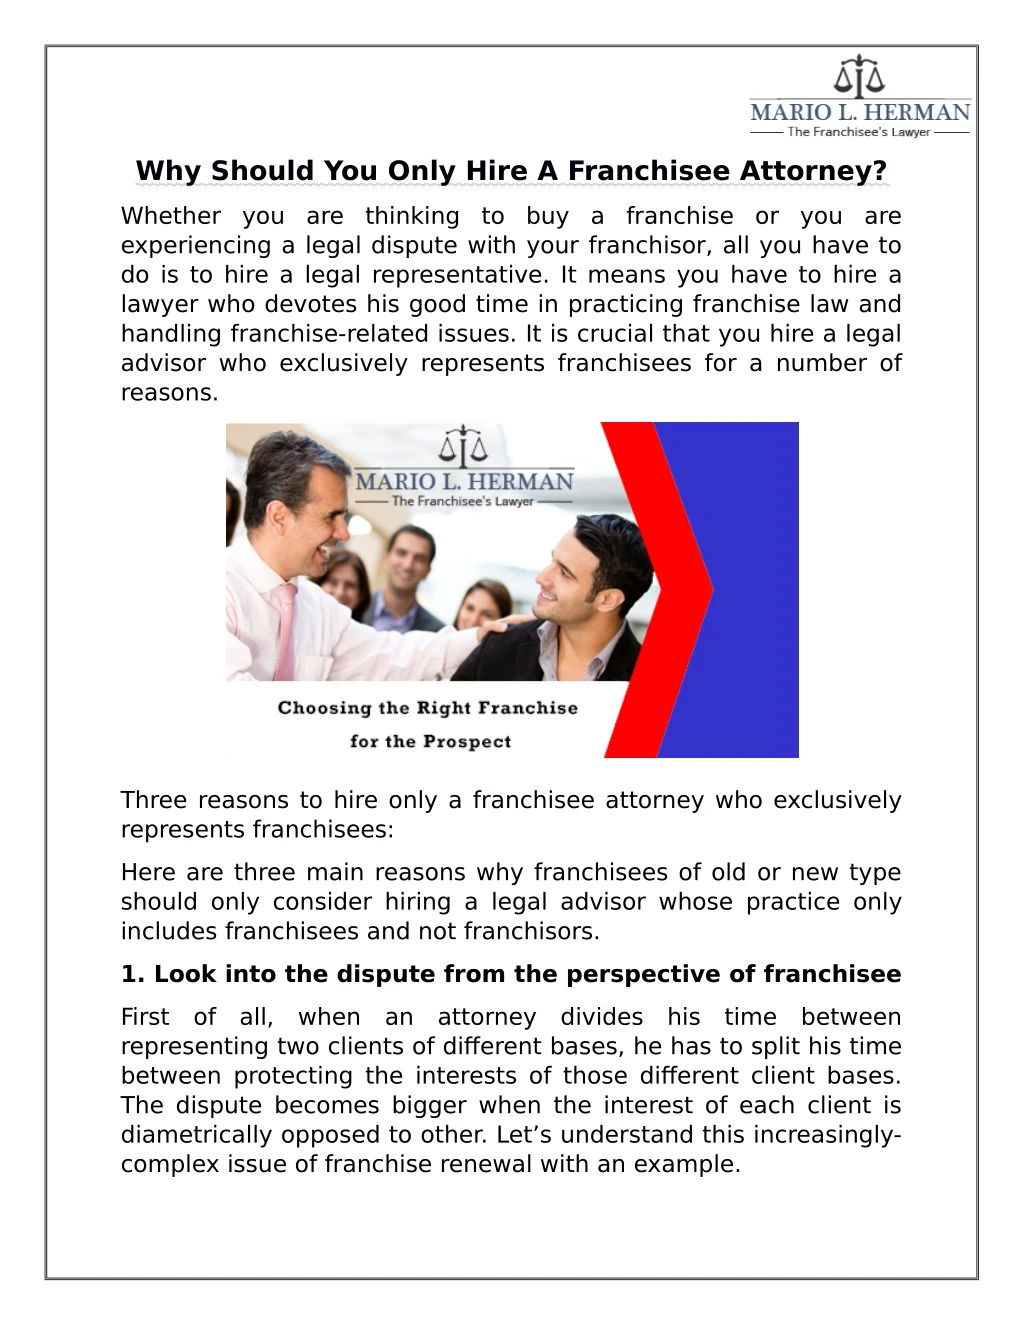 why should you only hire a franchisee attorney